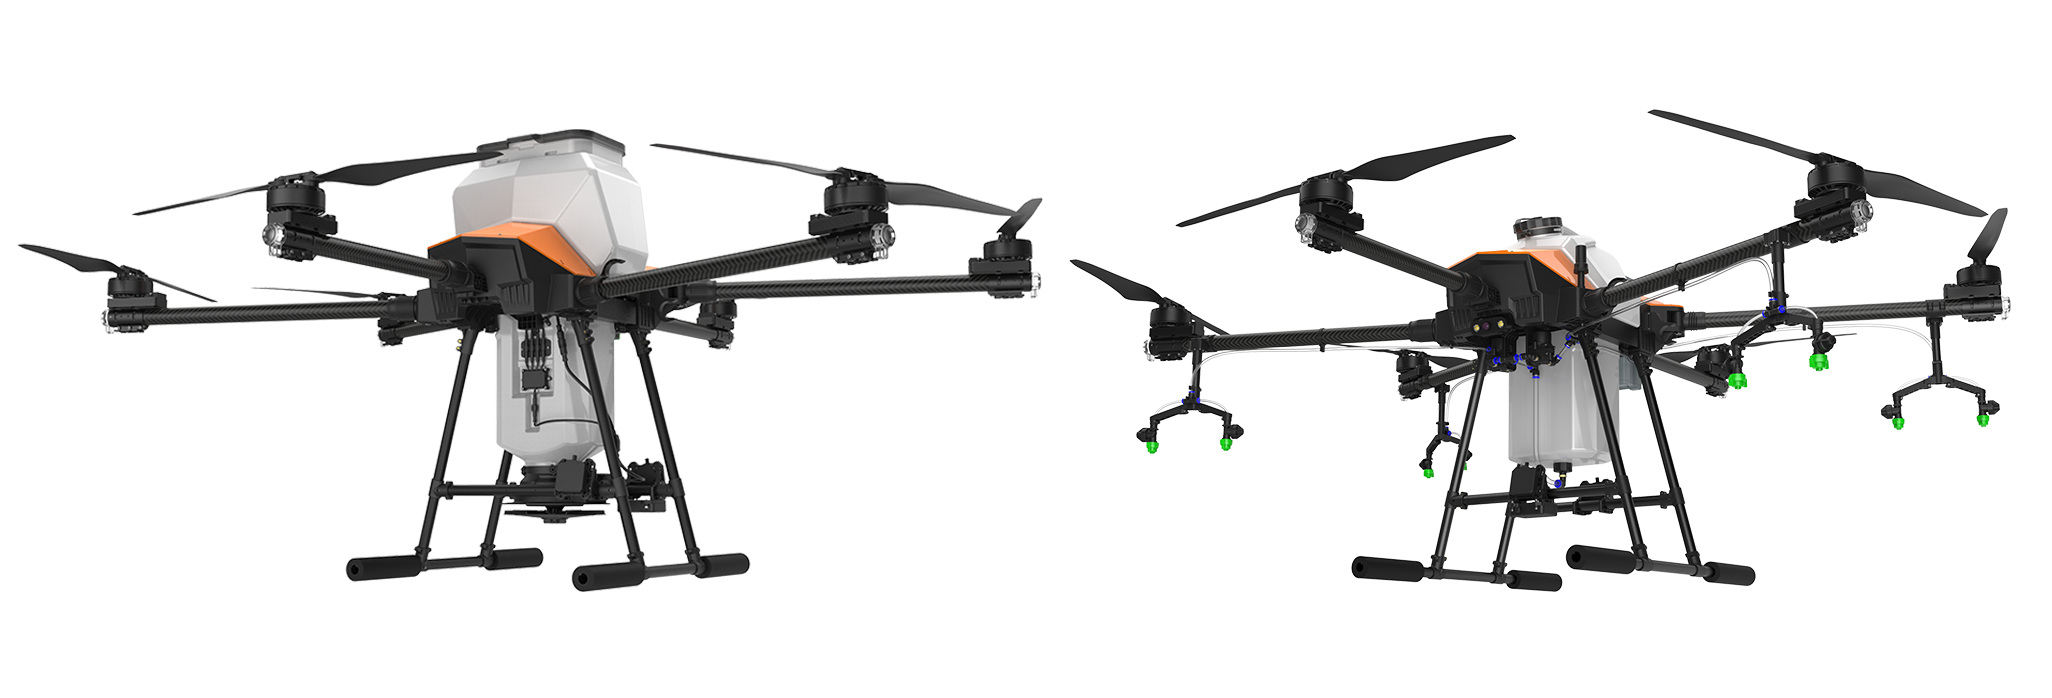 Two types of application are offered for G Series drone setup